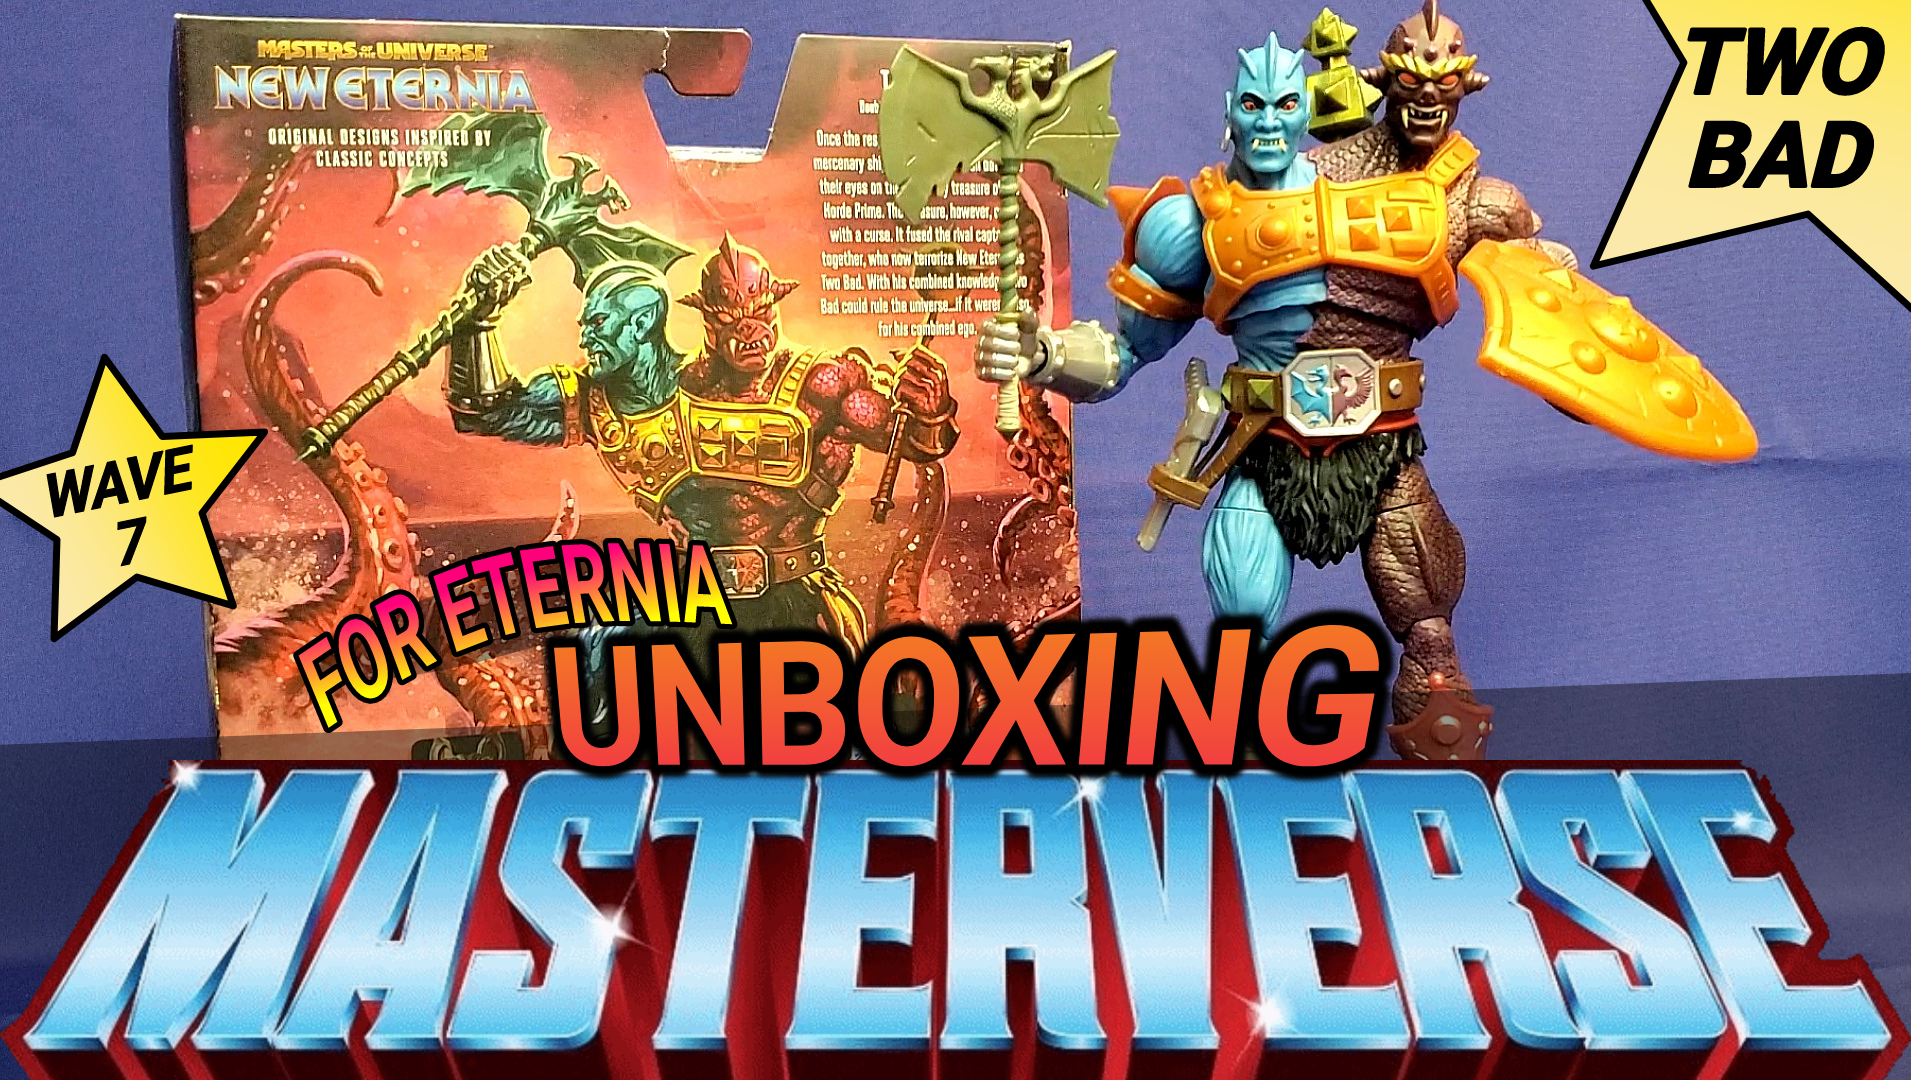 Watch our UNBOXING & REVIEW of Two Bad, the Wave 7 Deluxe Masterverse figure